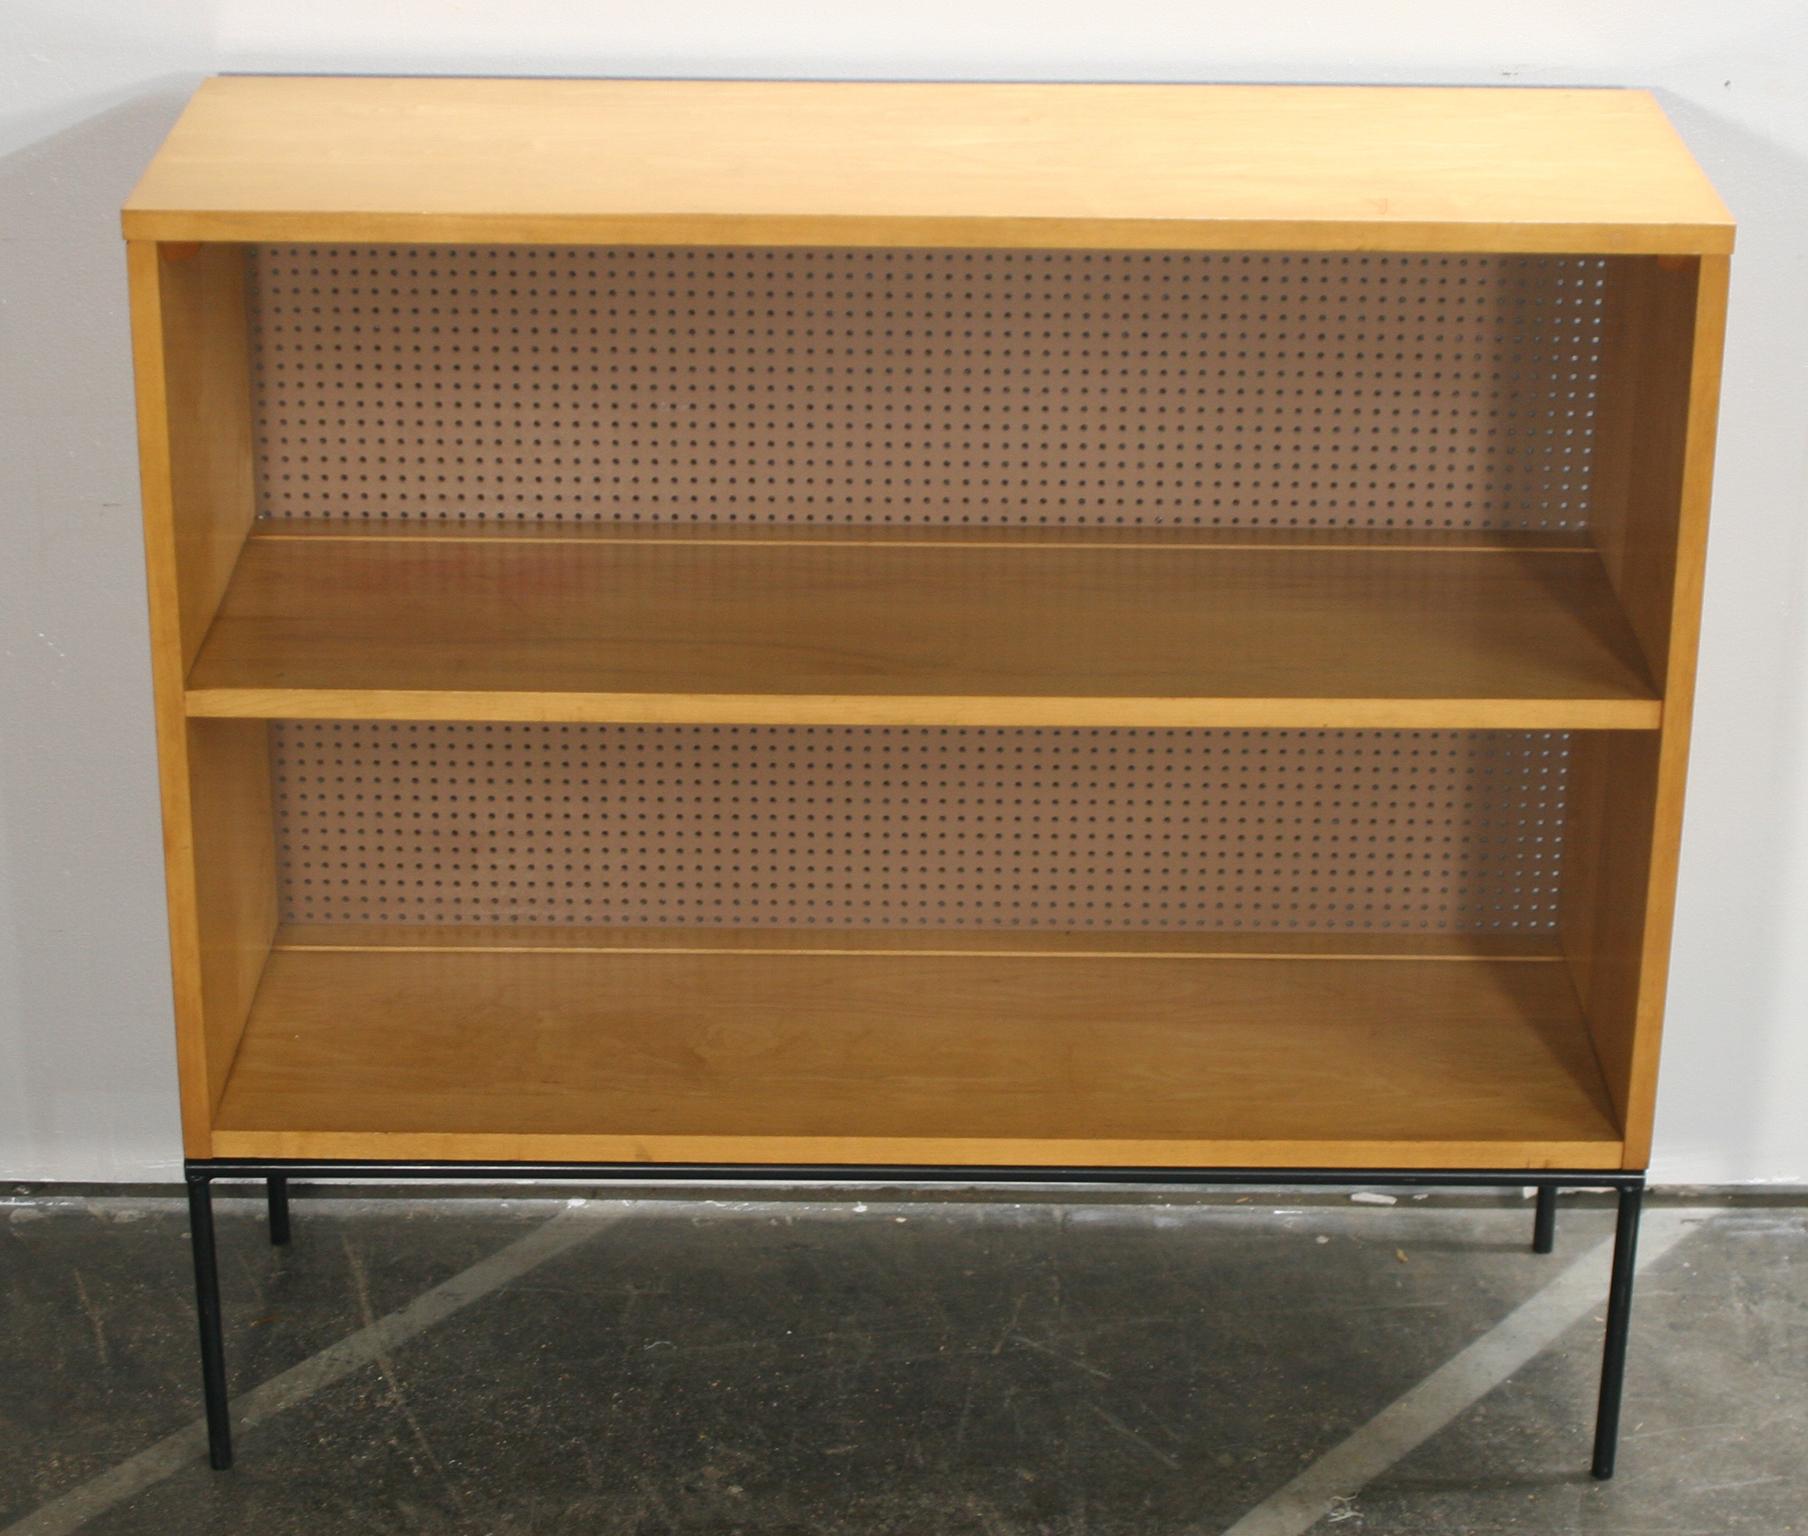 Vintage midcentury super clean Paul McCobb single bookcase #1516 blonde maple finish Iron base. Beautiful bookcase by Paul McCobb circa 1950s Planner Group, single center fixed shelf, solid maple with blonde clearcoat. Rare iron base. Clean inside